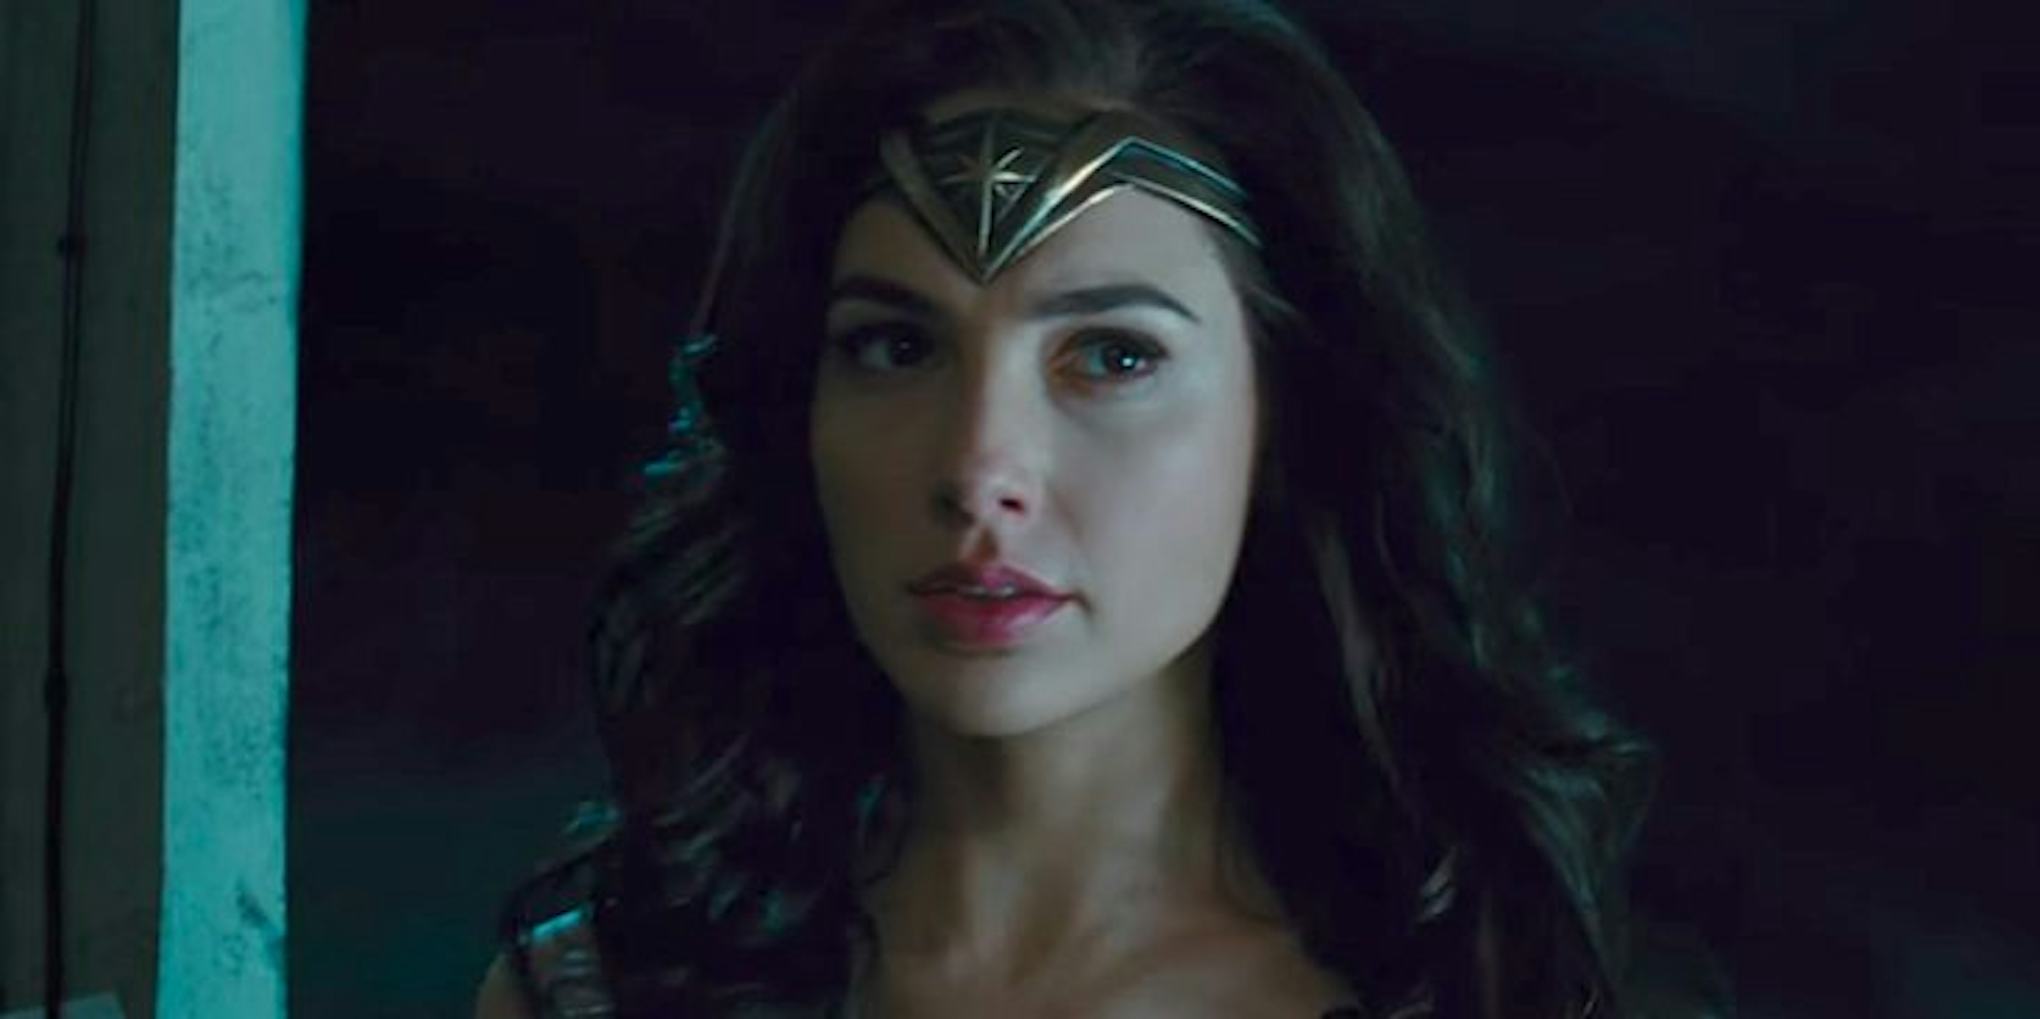 Who Plays Wonder Woman? What We Know About Gal Gadot